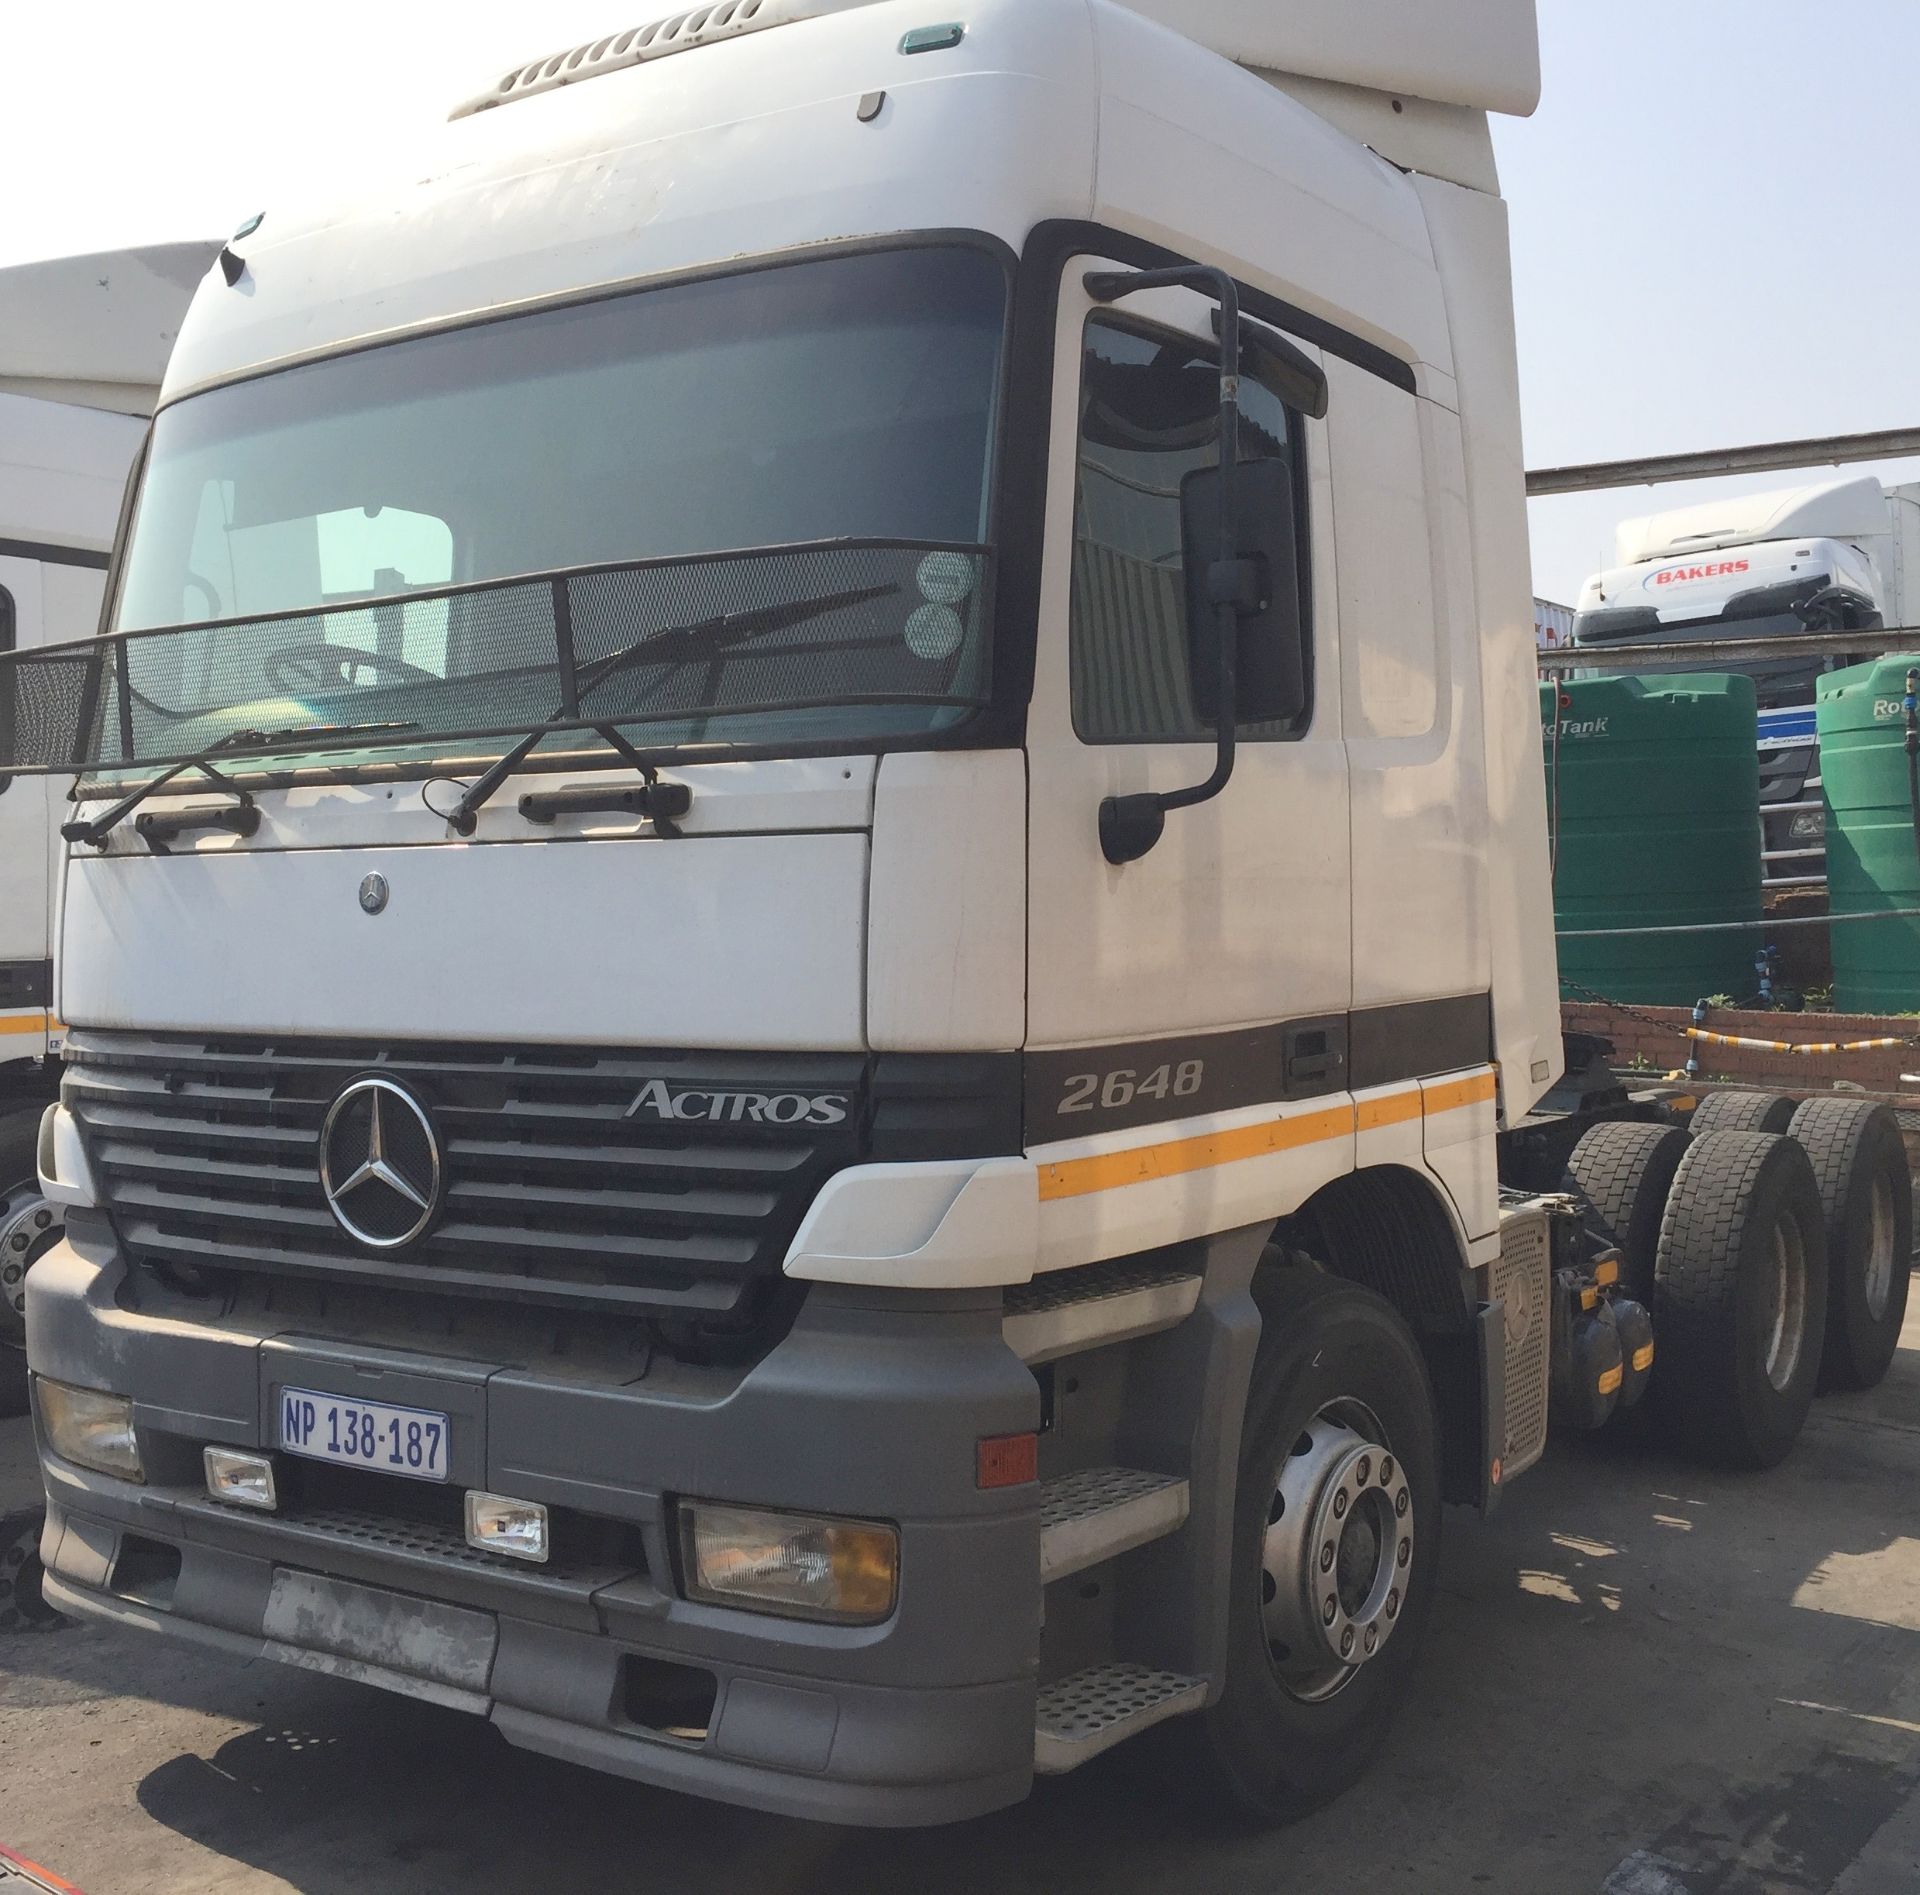 2001 M/BENZ ACTROS 2648 6X4 T/T - REG NO: NP138187 - (ITEM TO BE SOLD SUBJECT TO CONFIRMATION) - Image 2 of 10